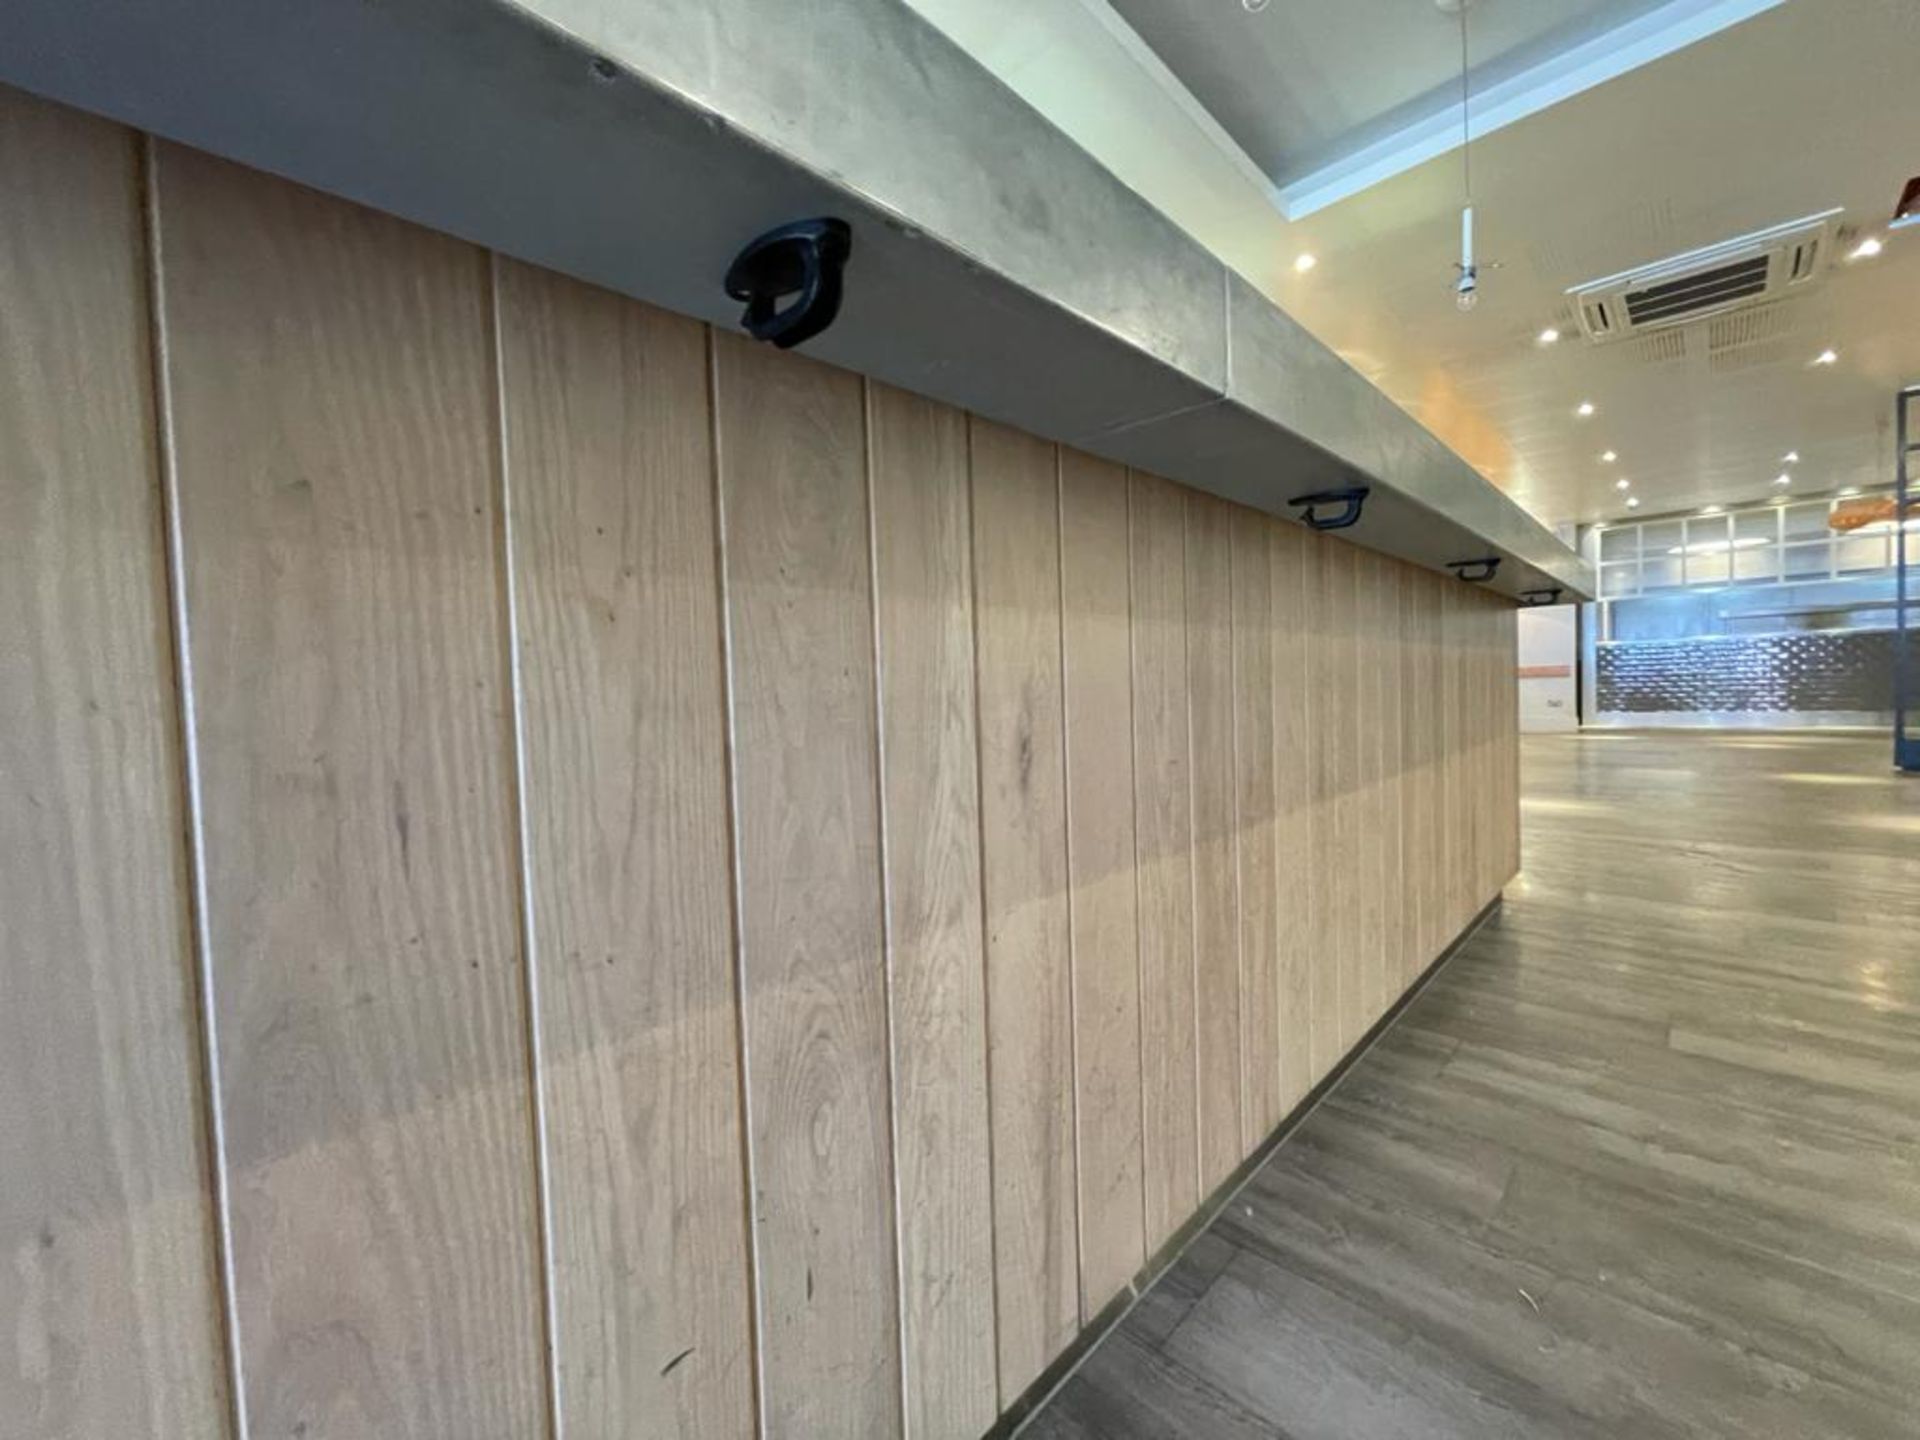 1 x Contemporary Restaurant Bar With Light Wood Panel Fascia, Sheet Metal Covered Bar Top, - Image 34 of 57